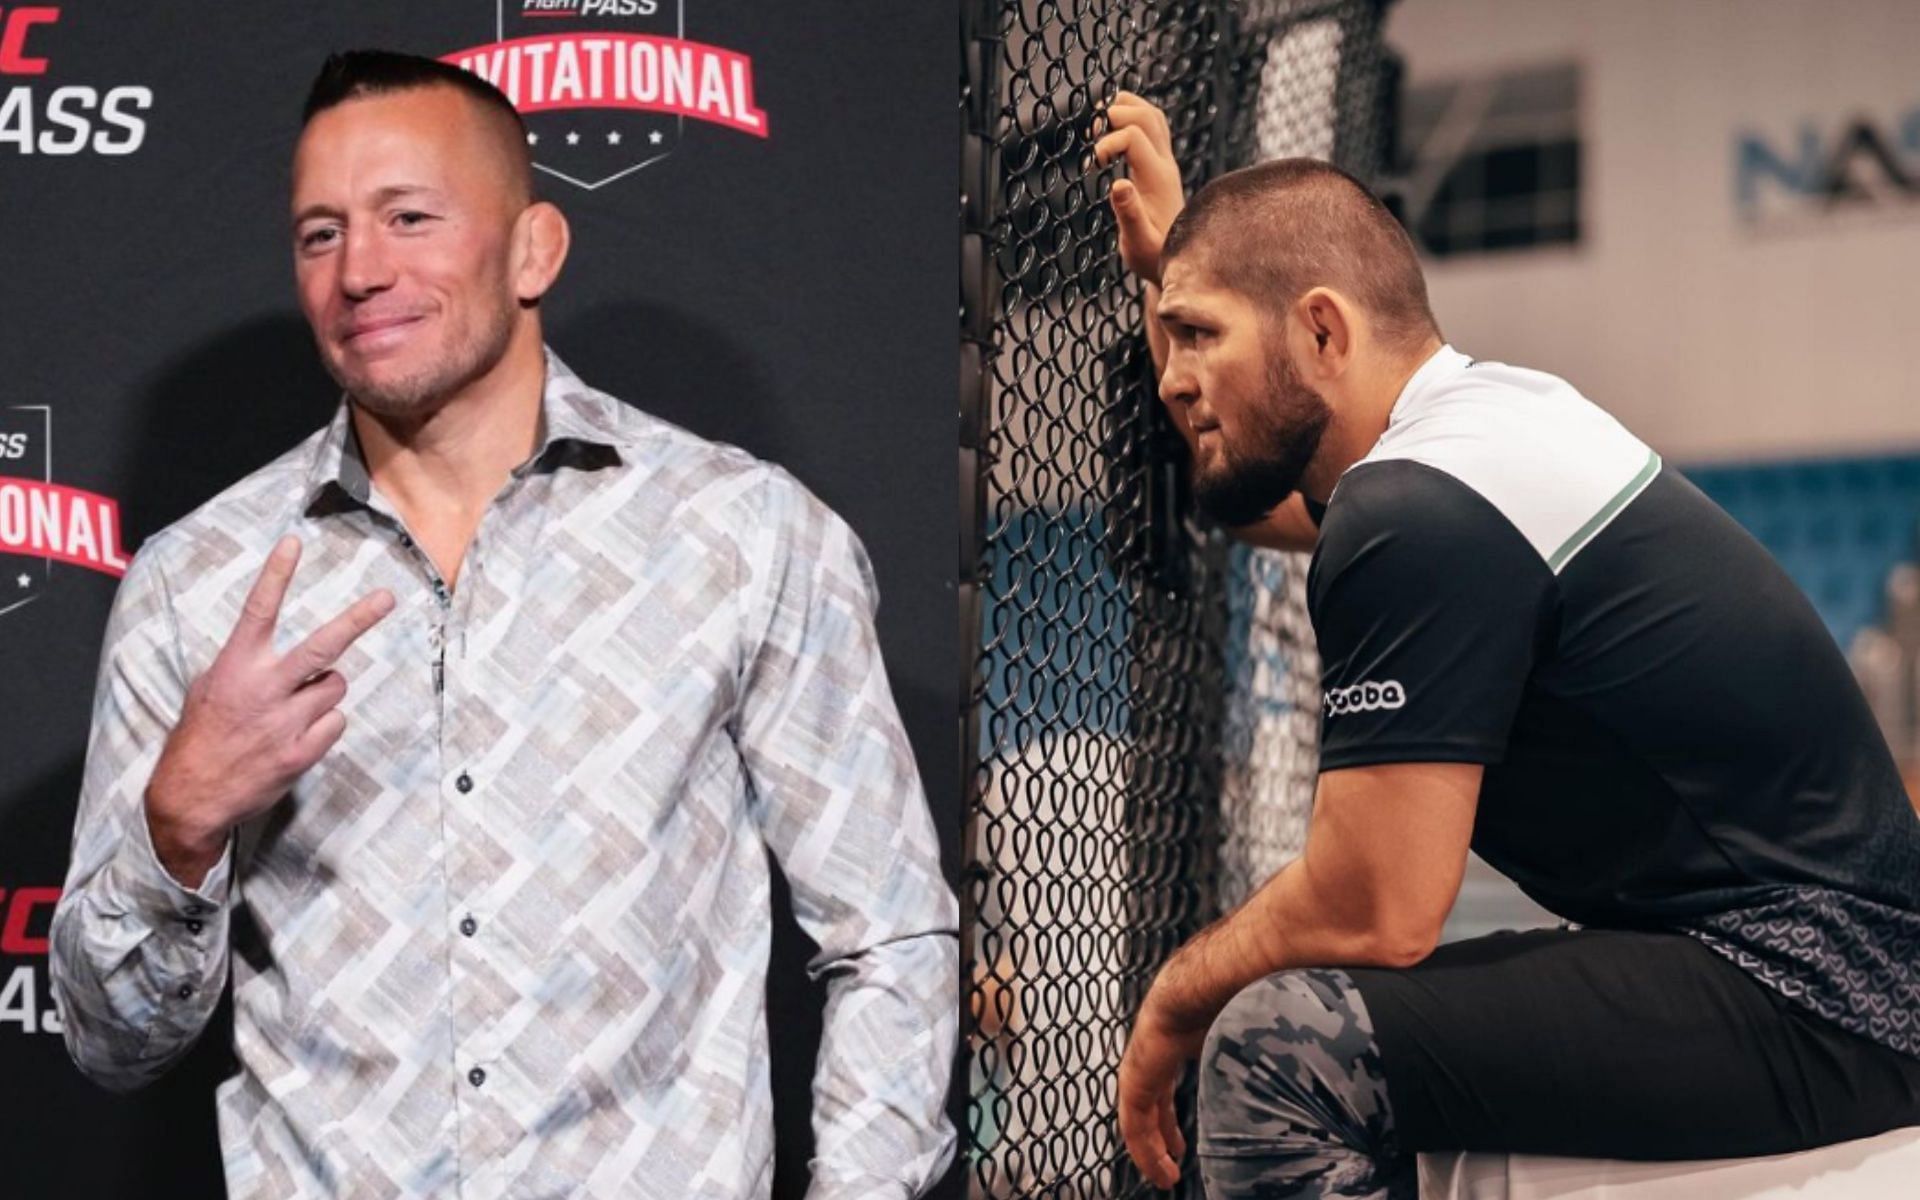 Georges St-Pierre (L) has long-discussed a fight with Khabib Nurmagomedov (R). [Images via @georgesstpierre and @khabib_nurmagomedov]